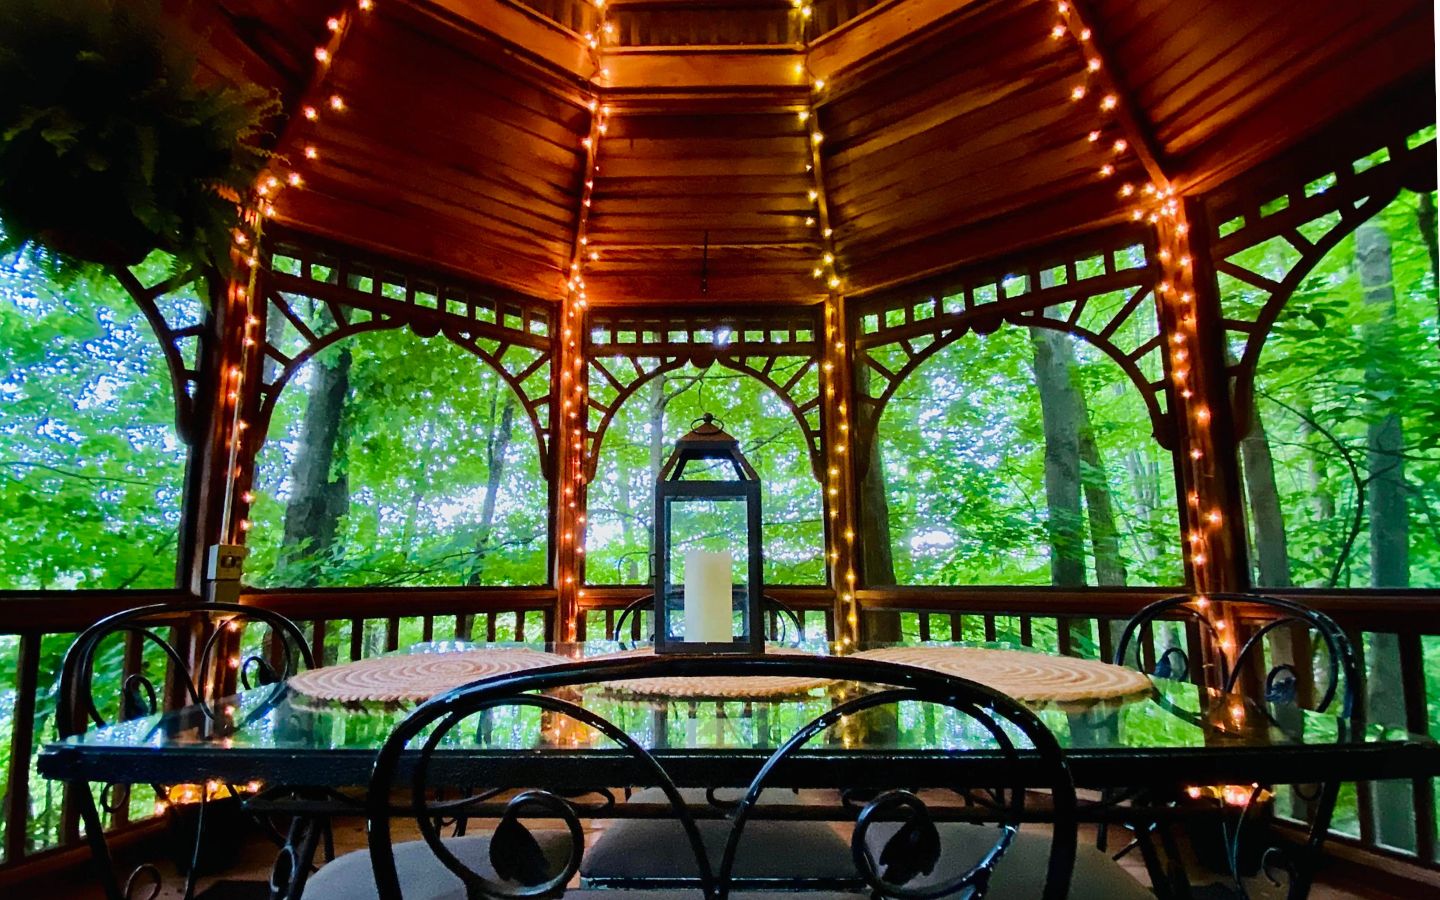 The inside of the gazebo at Castle in the Country